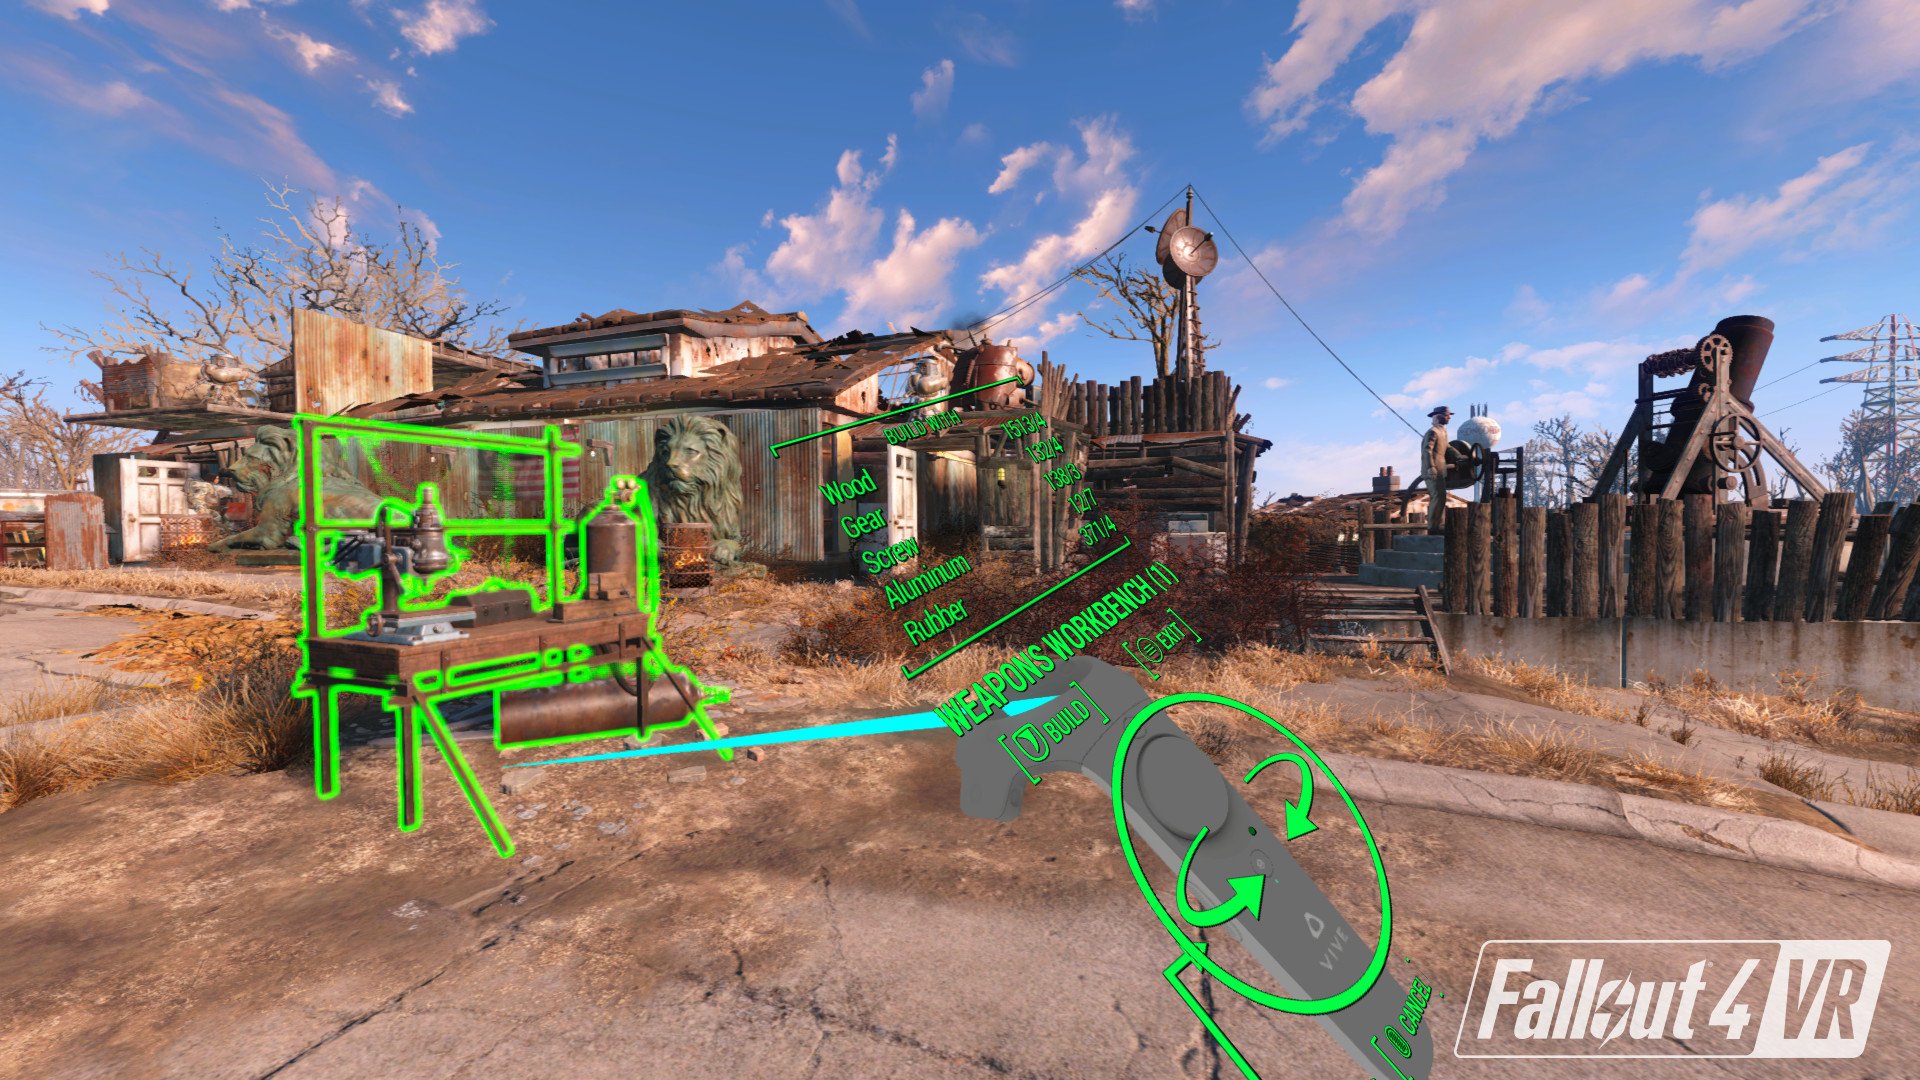 ESD Fallout 4 VR 